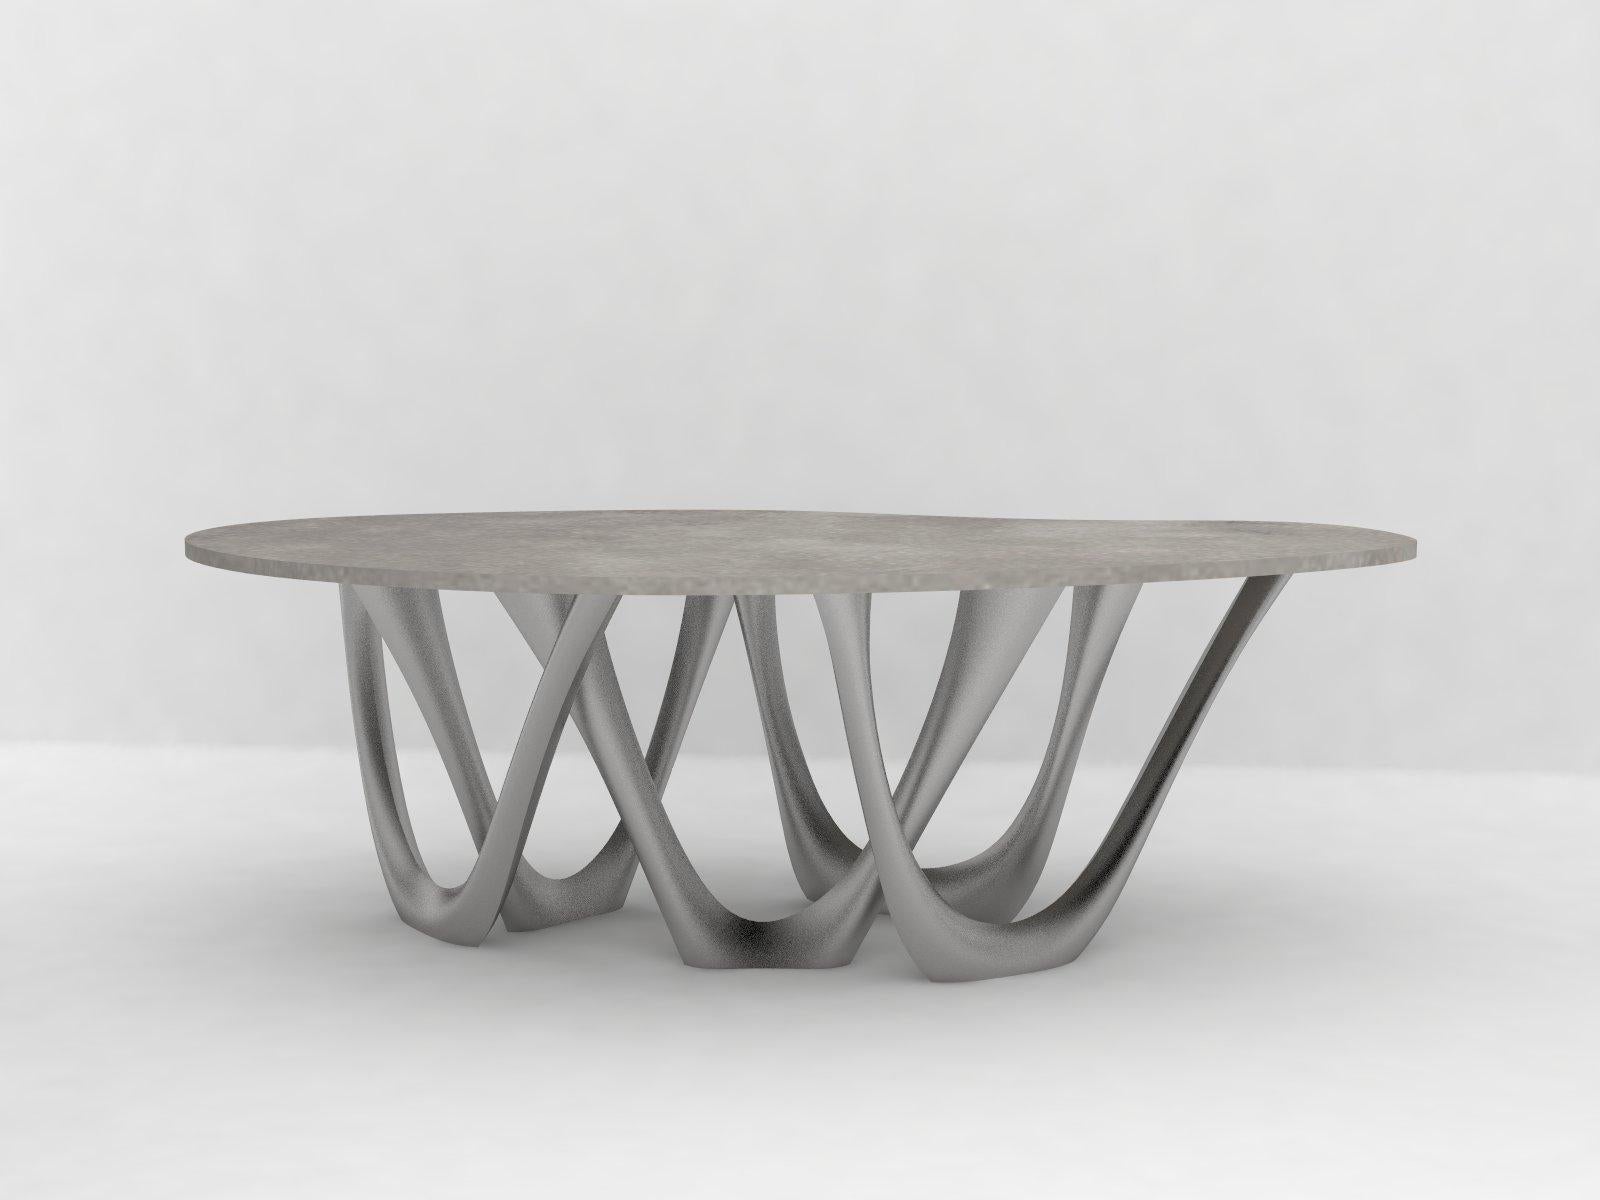 We use parametric design software to generate G-table form. Modifying a few variables lets us create a miniature model as well as a huge pavilion. Delicate structure of table legs may become stocky and dominating. All those factors cause G-yable to